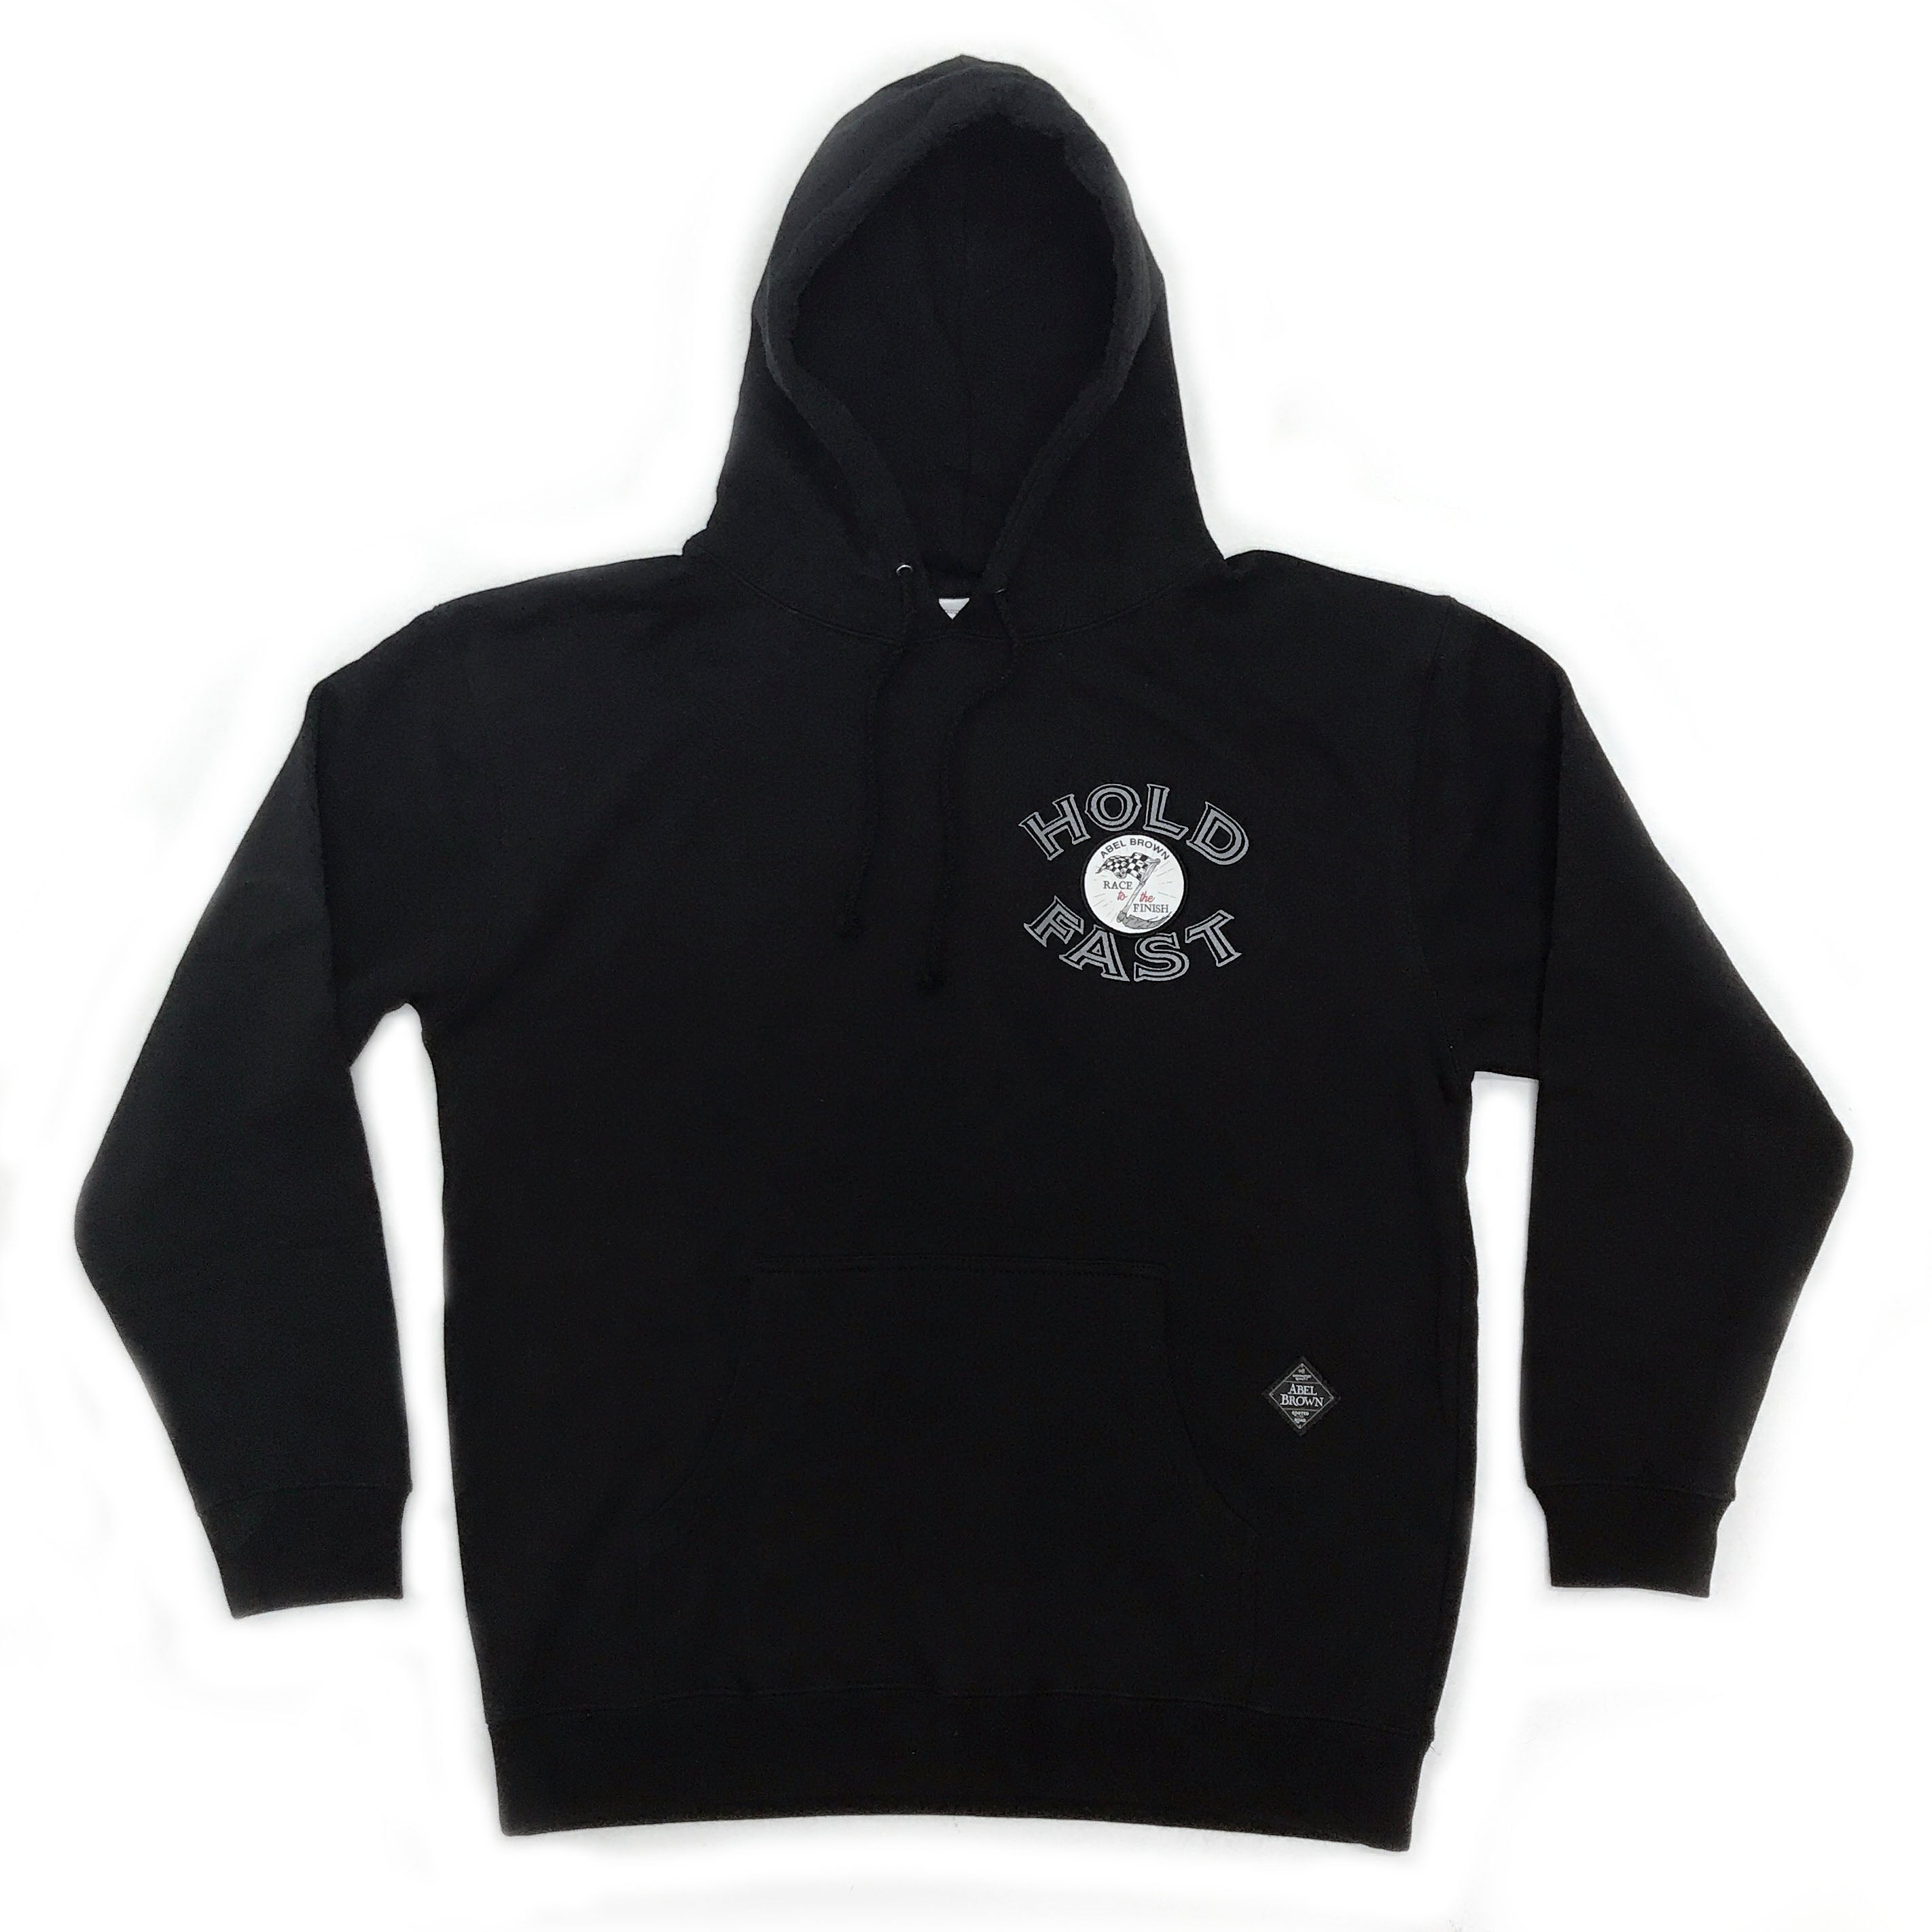 Race to the Finish Hoodie